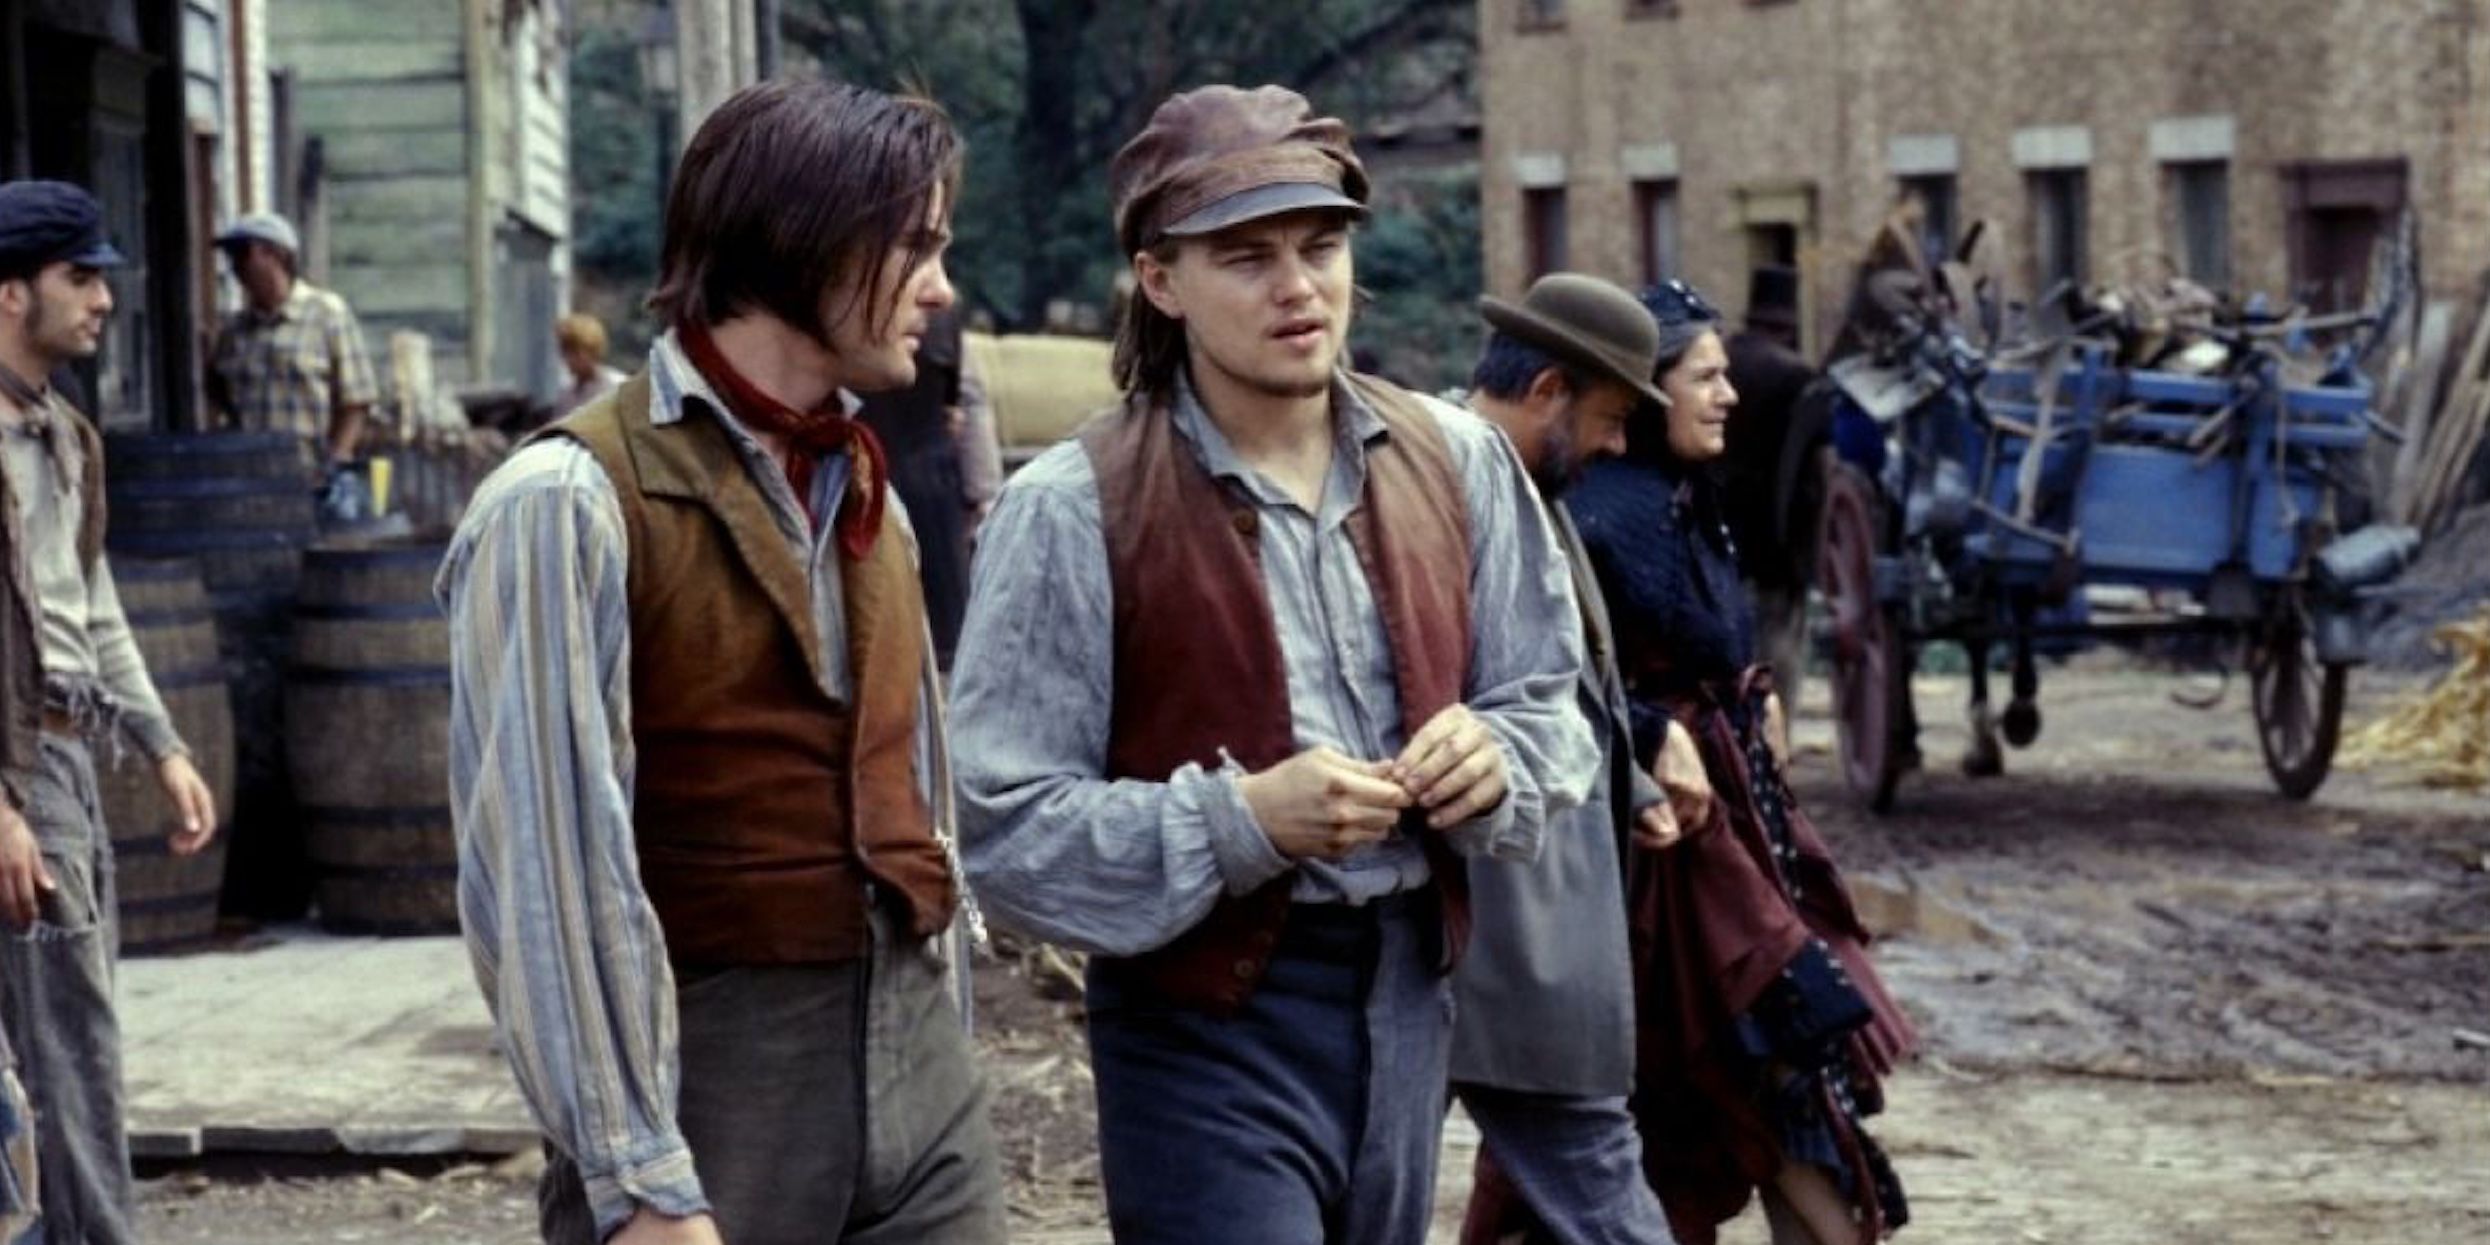 Amsterdam and Johnny talking on the street in Gangs of New York